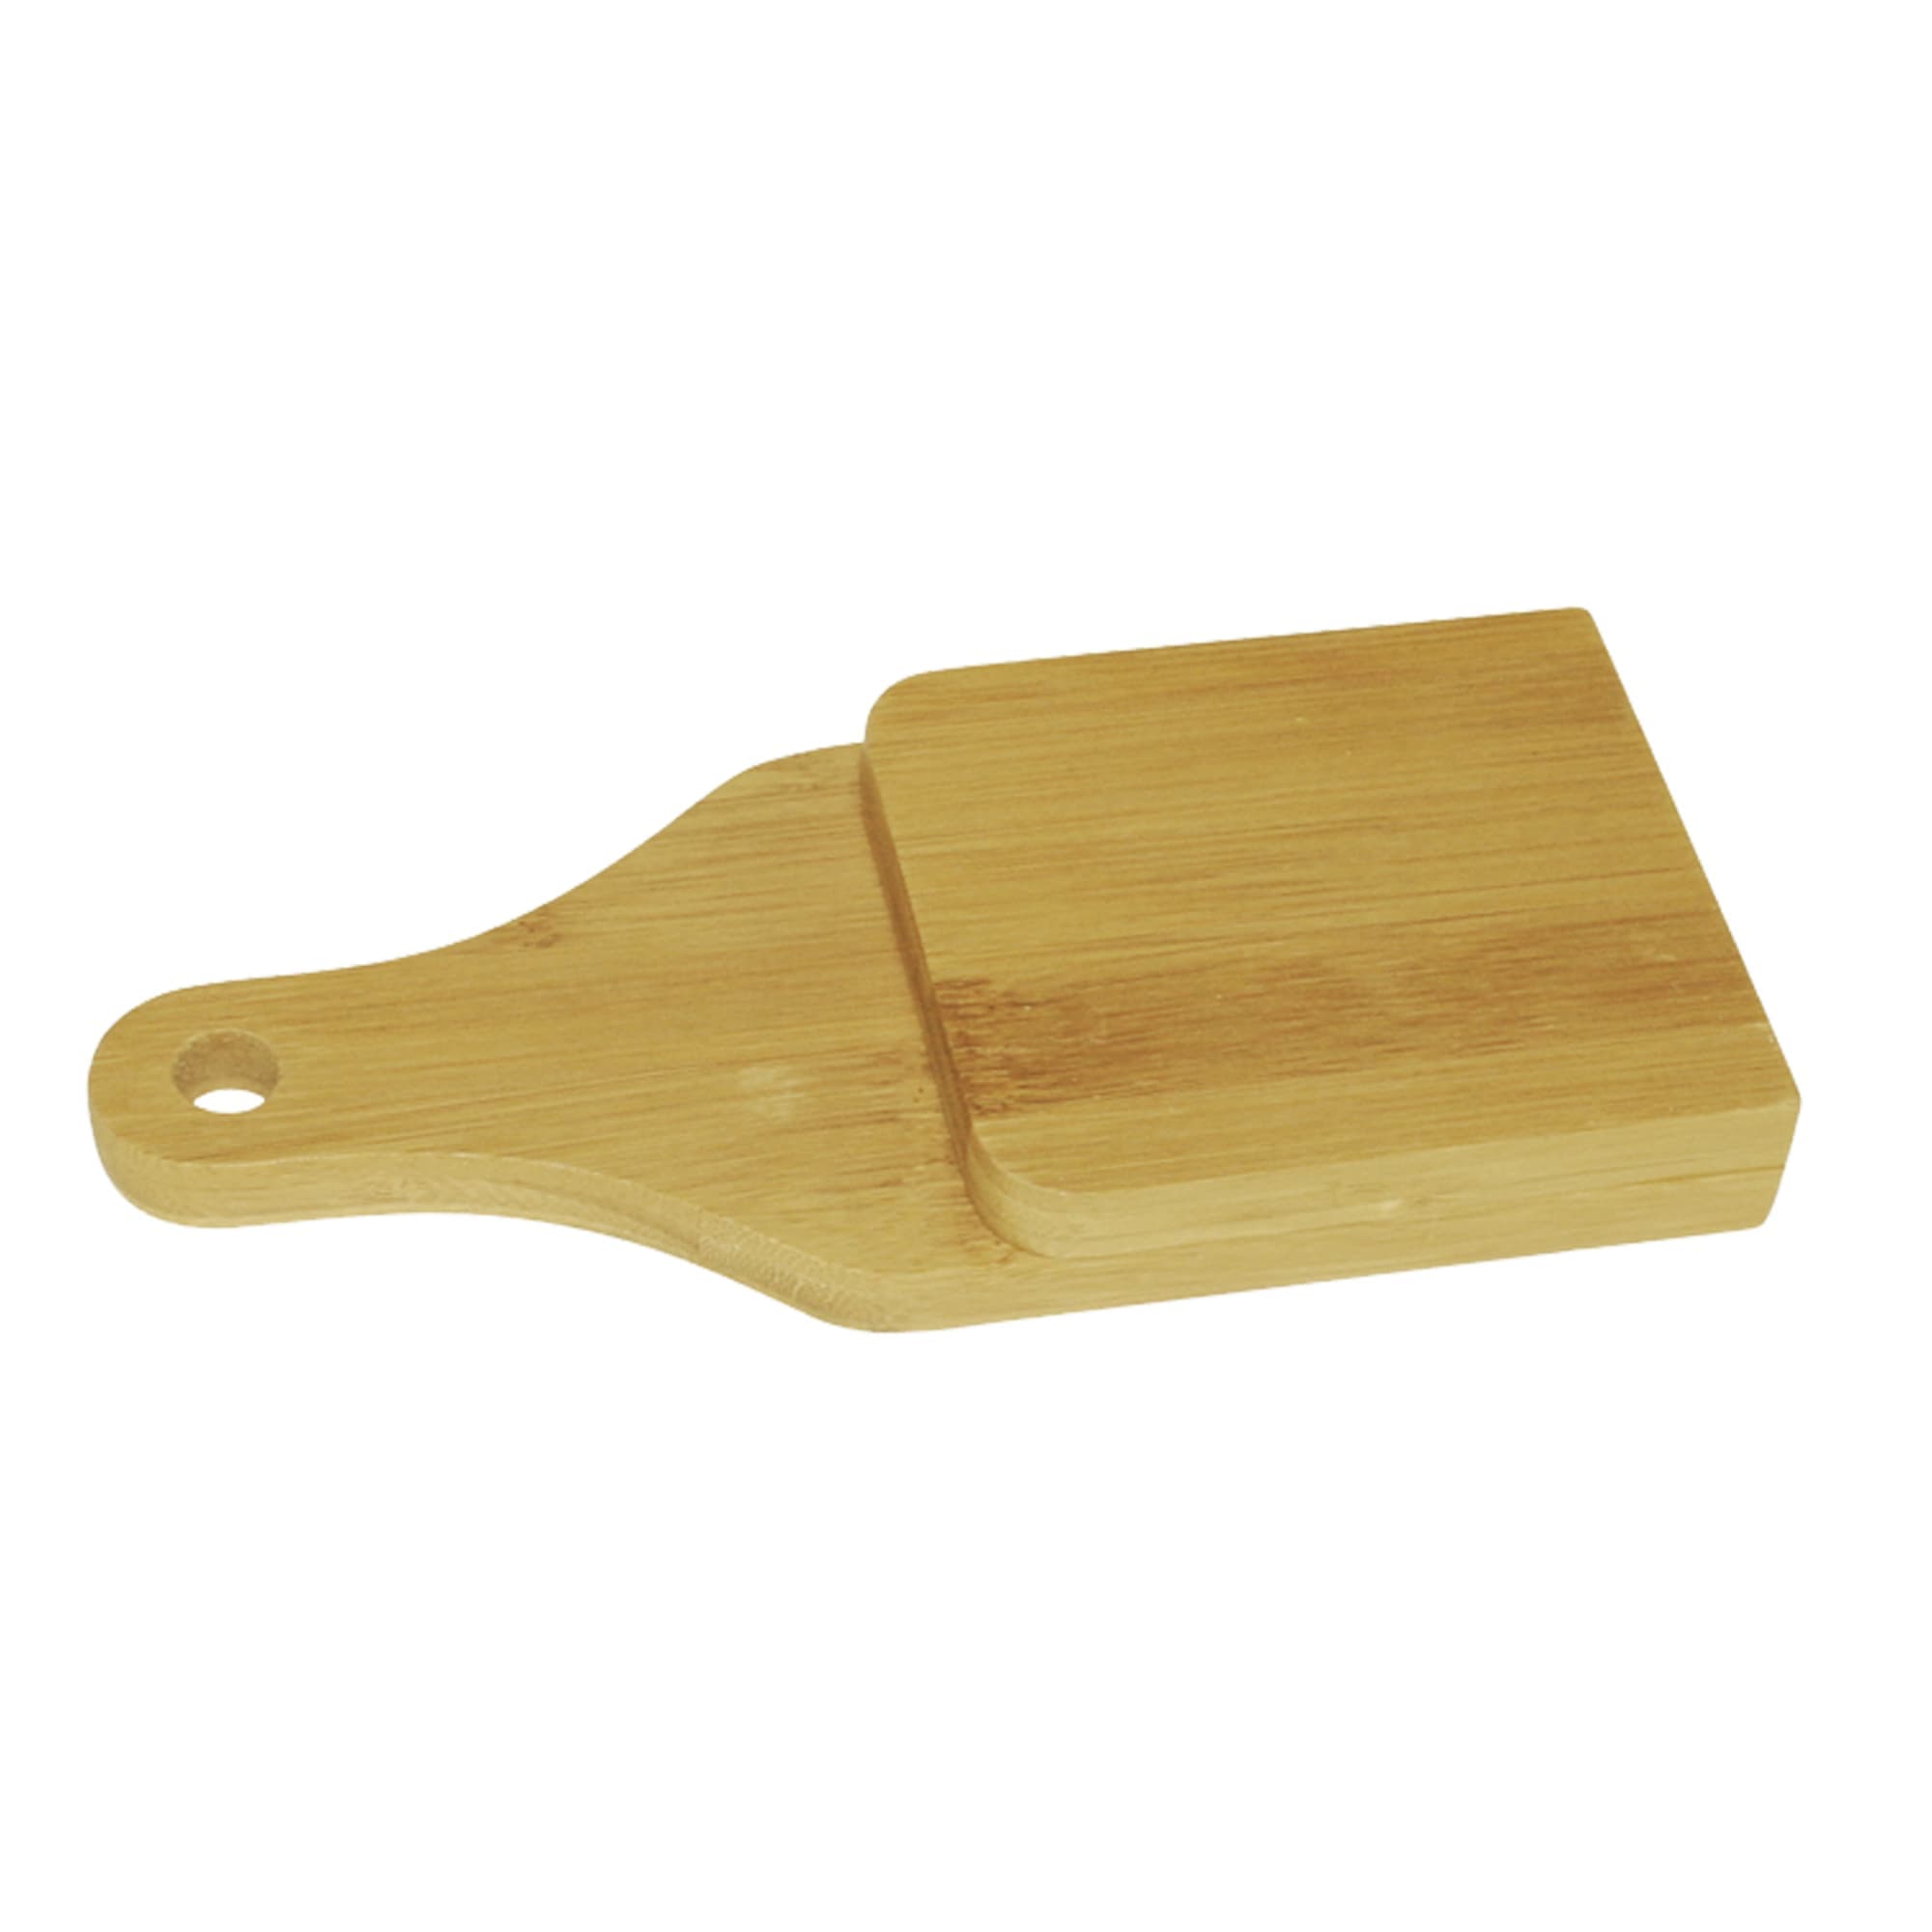 Home Basics Easy Press Small Bamboo Tostonera, Natural $2.00 EACH, CASE PACK OF 24